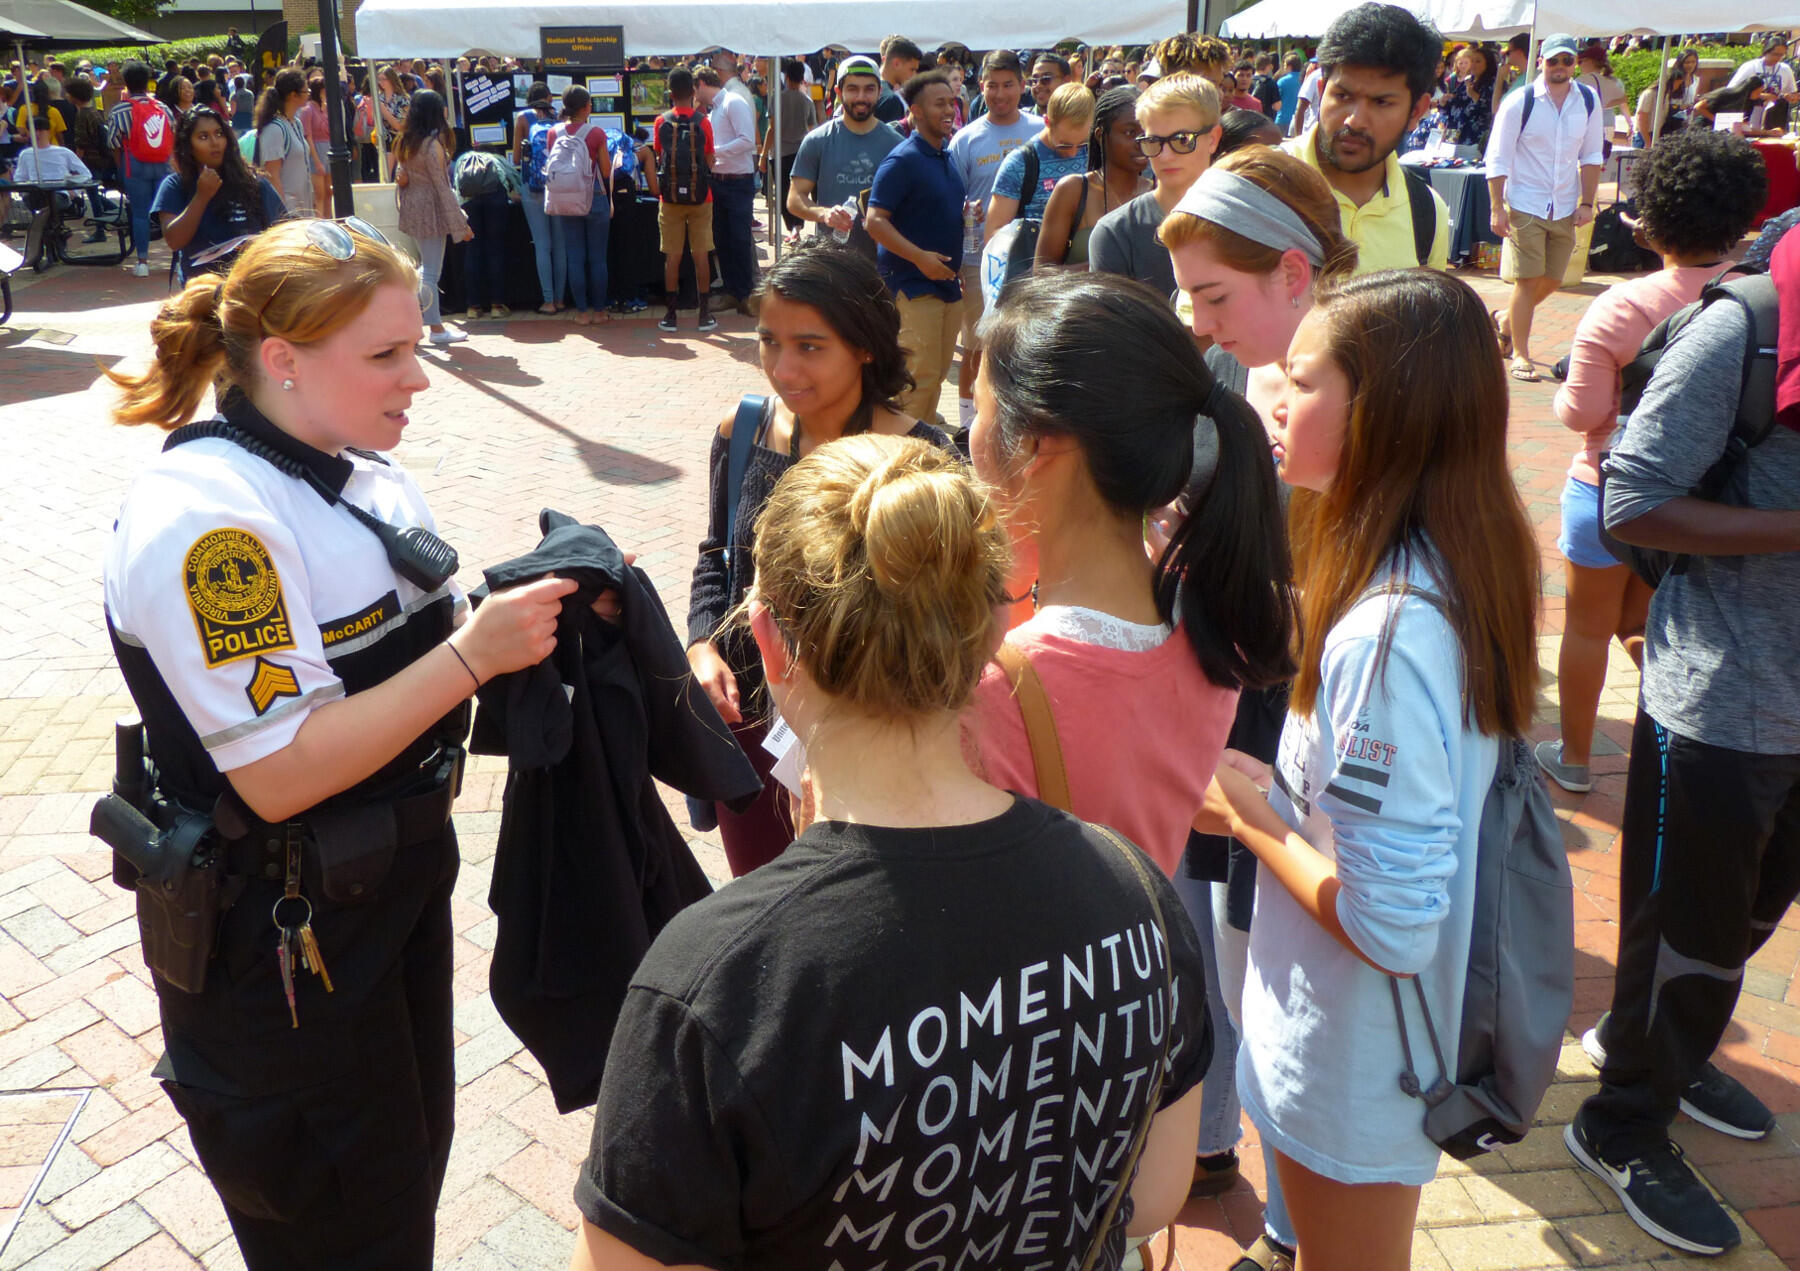 A police officer, at left, speaks to students.